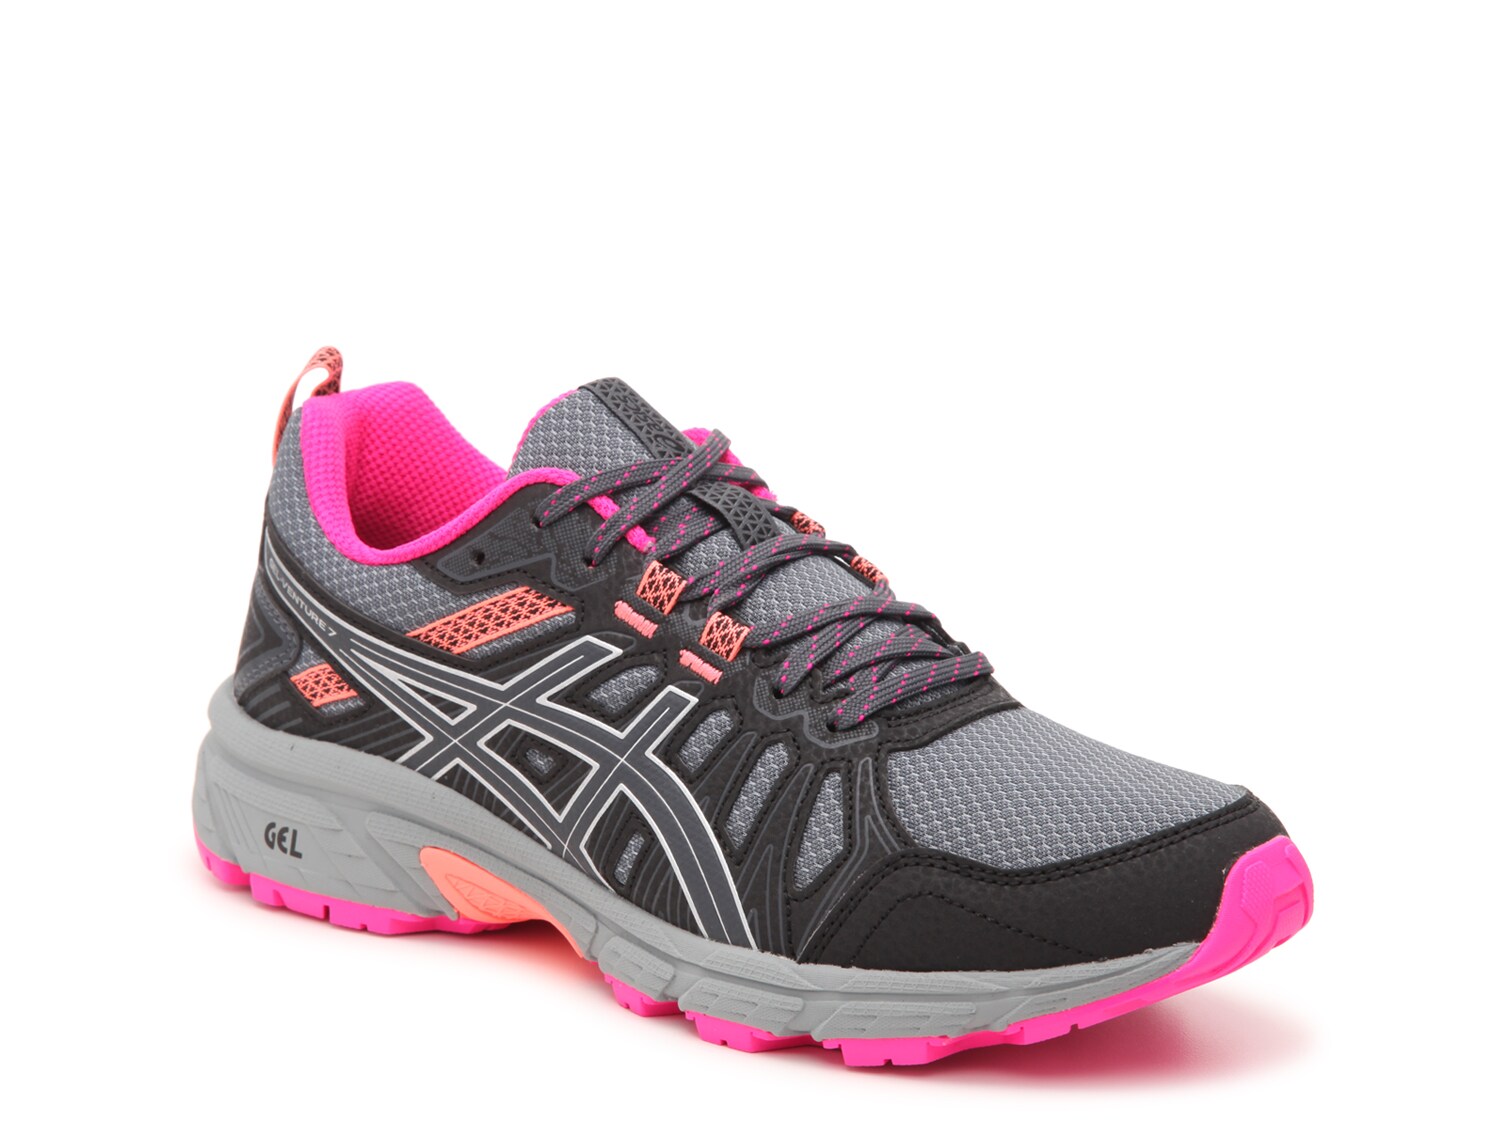 dsw running shoes womens